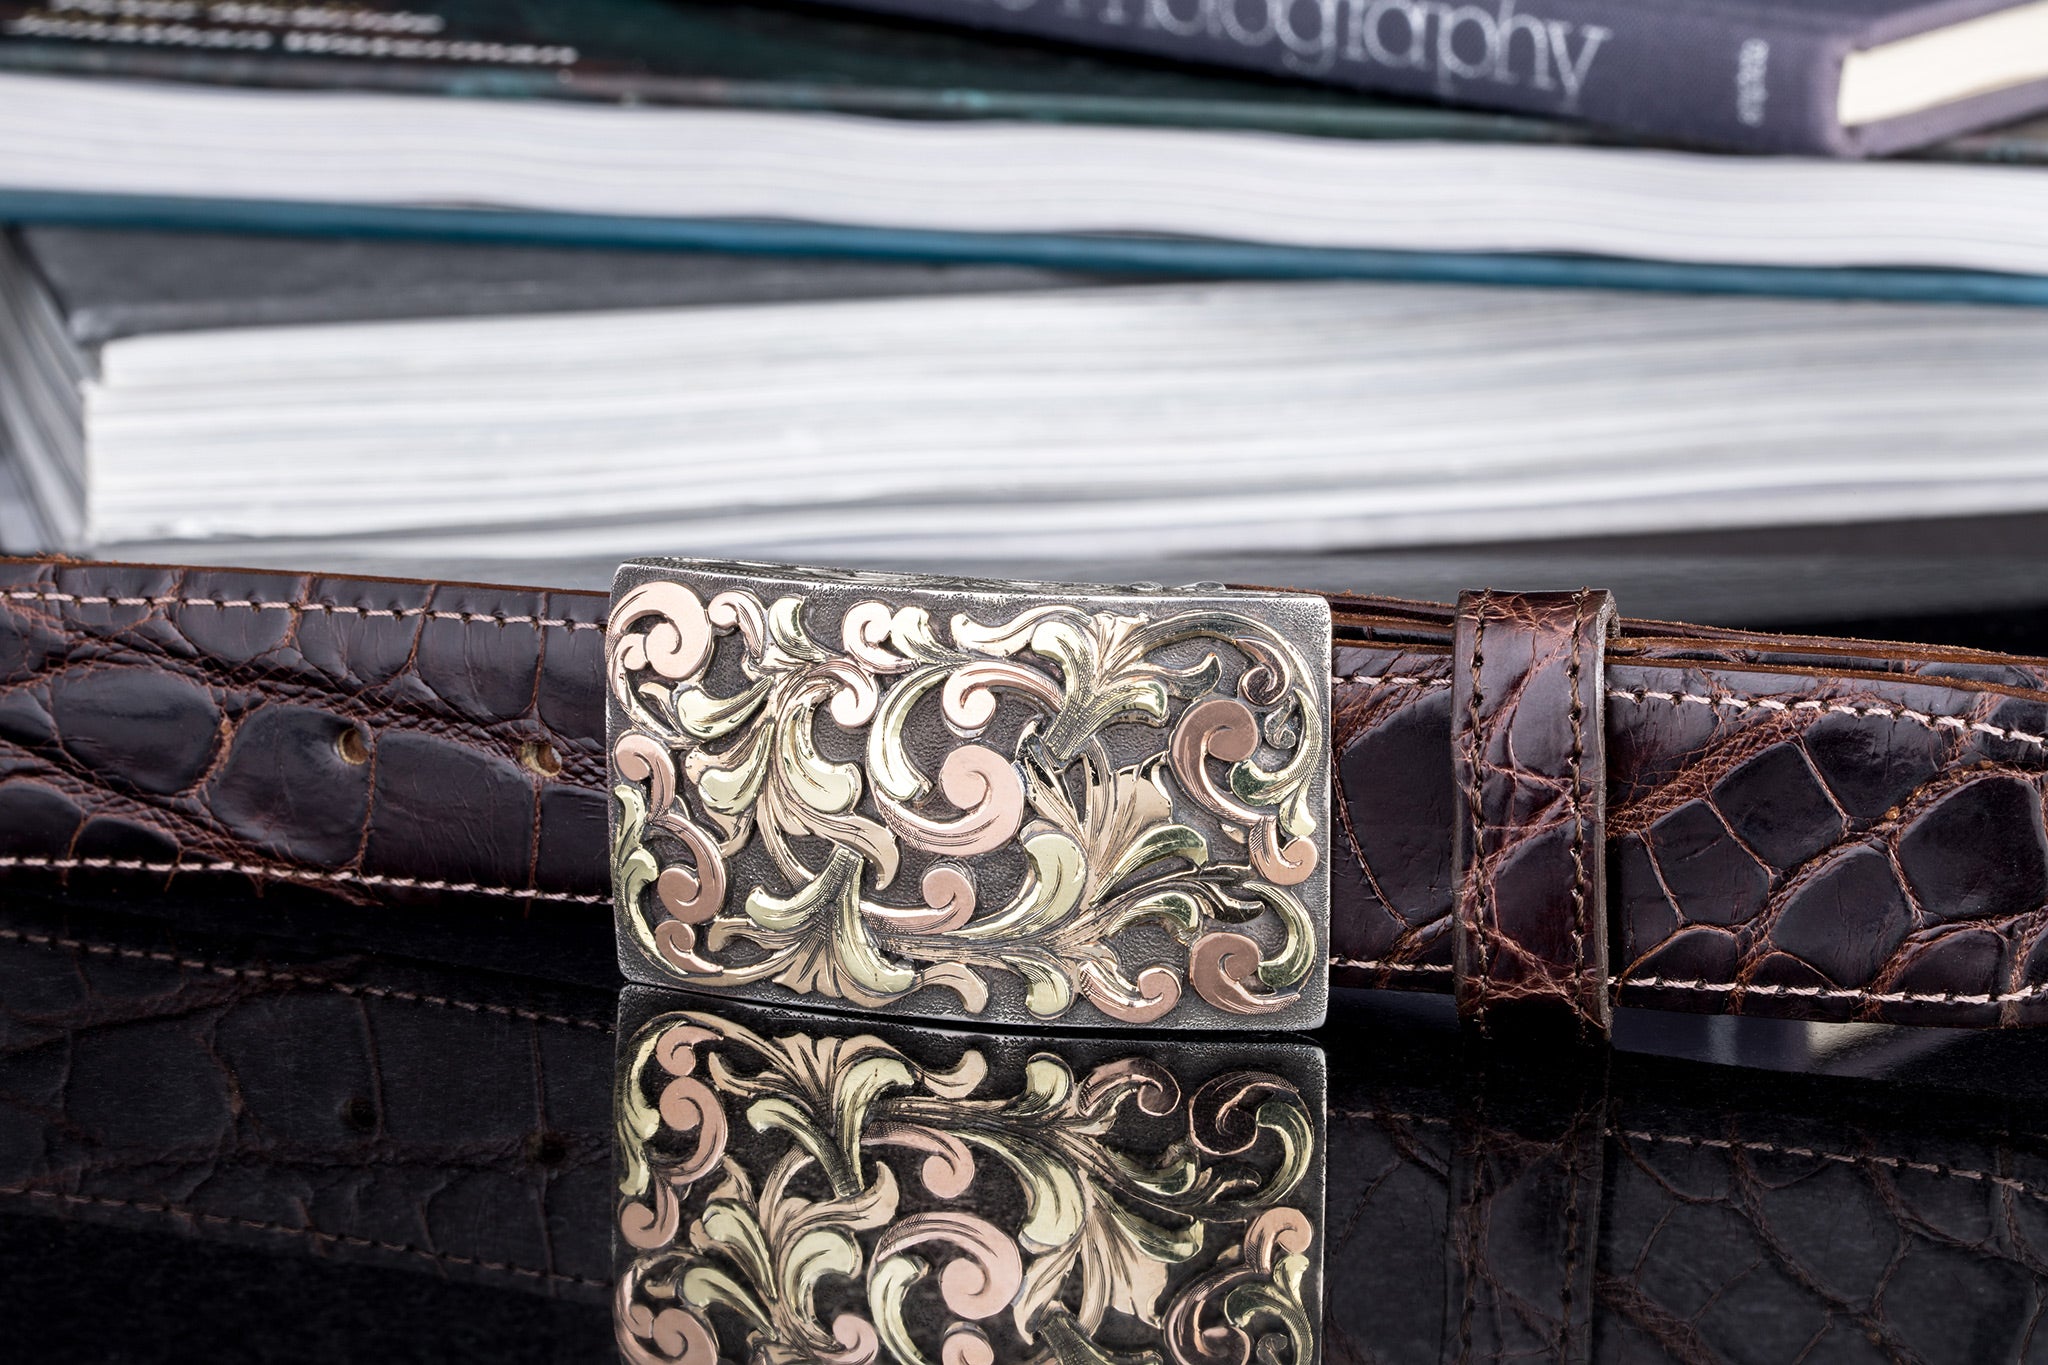 Tyson Swirl Midas | Belts And Buckles - Trophy | Comstock Heritage